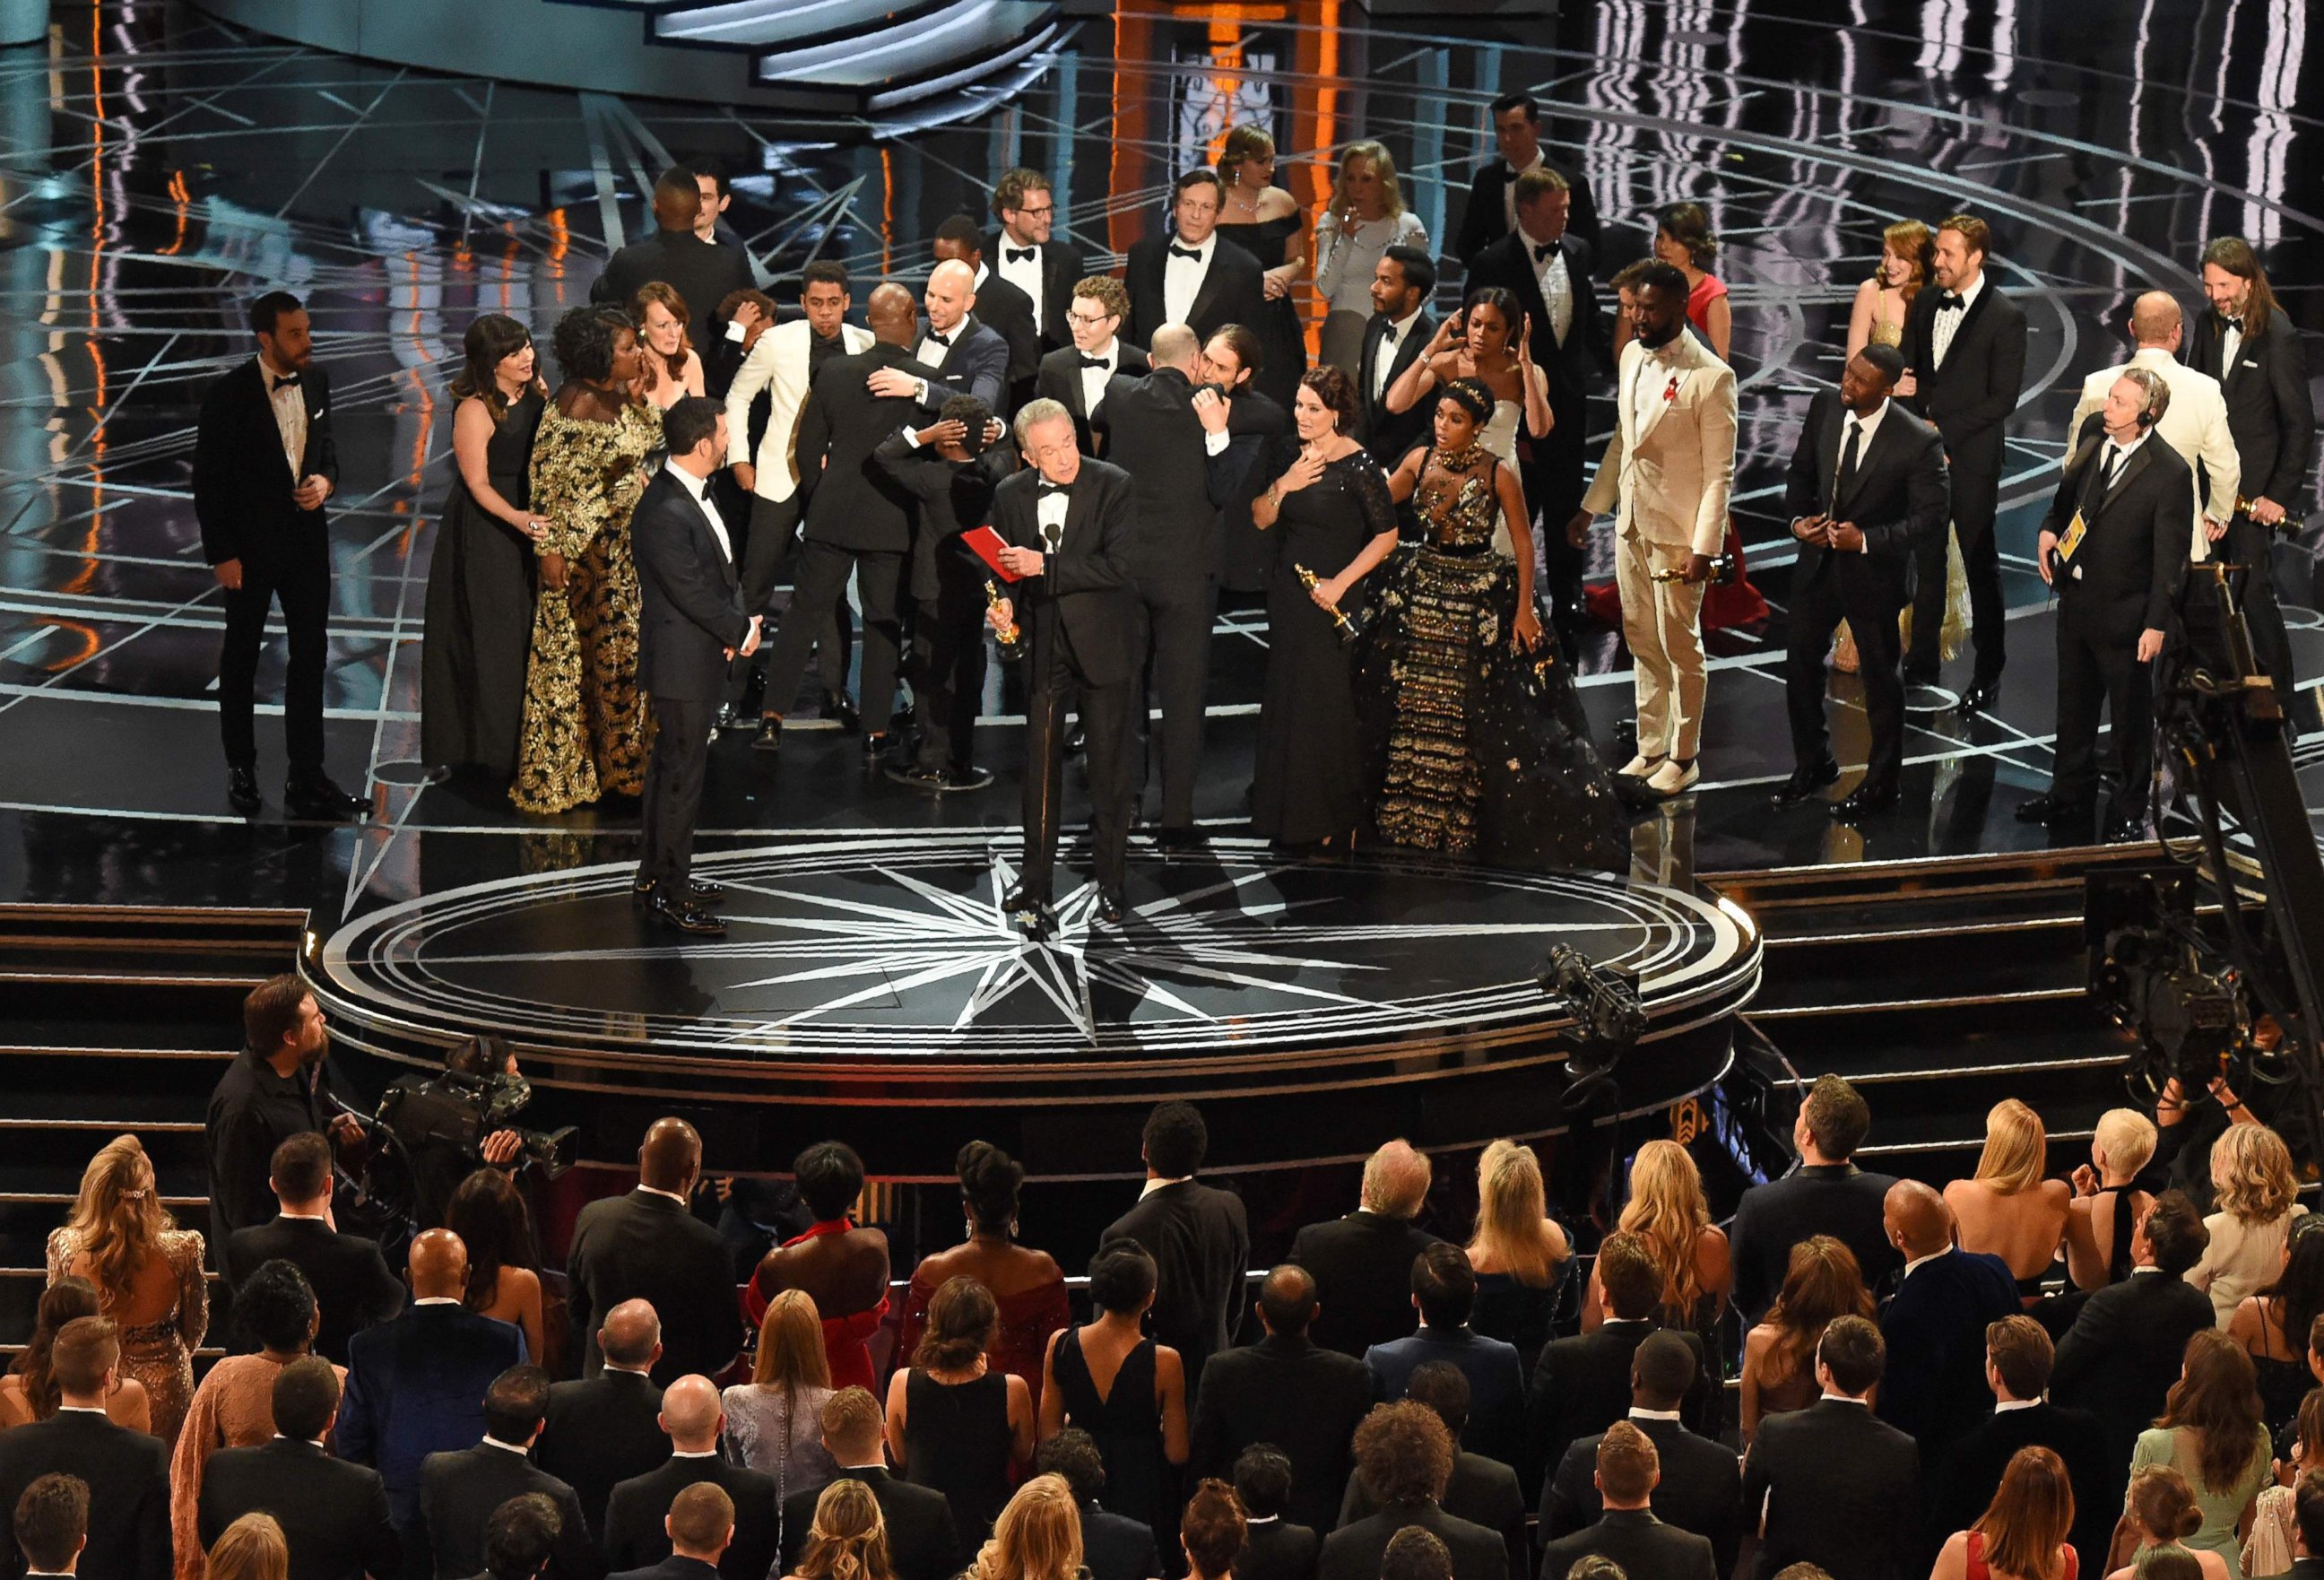 PHOTO: The cast of "Moonlight" and ""La La Land" appear on stage as presenter Warren Beatty shows the winner's envelope at the 89th Oscars on Feb. 26, 2017 in Hollywood, Calif.